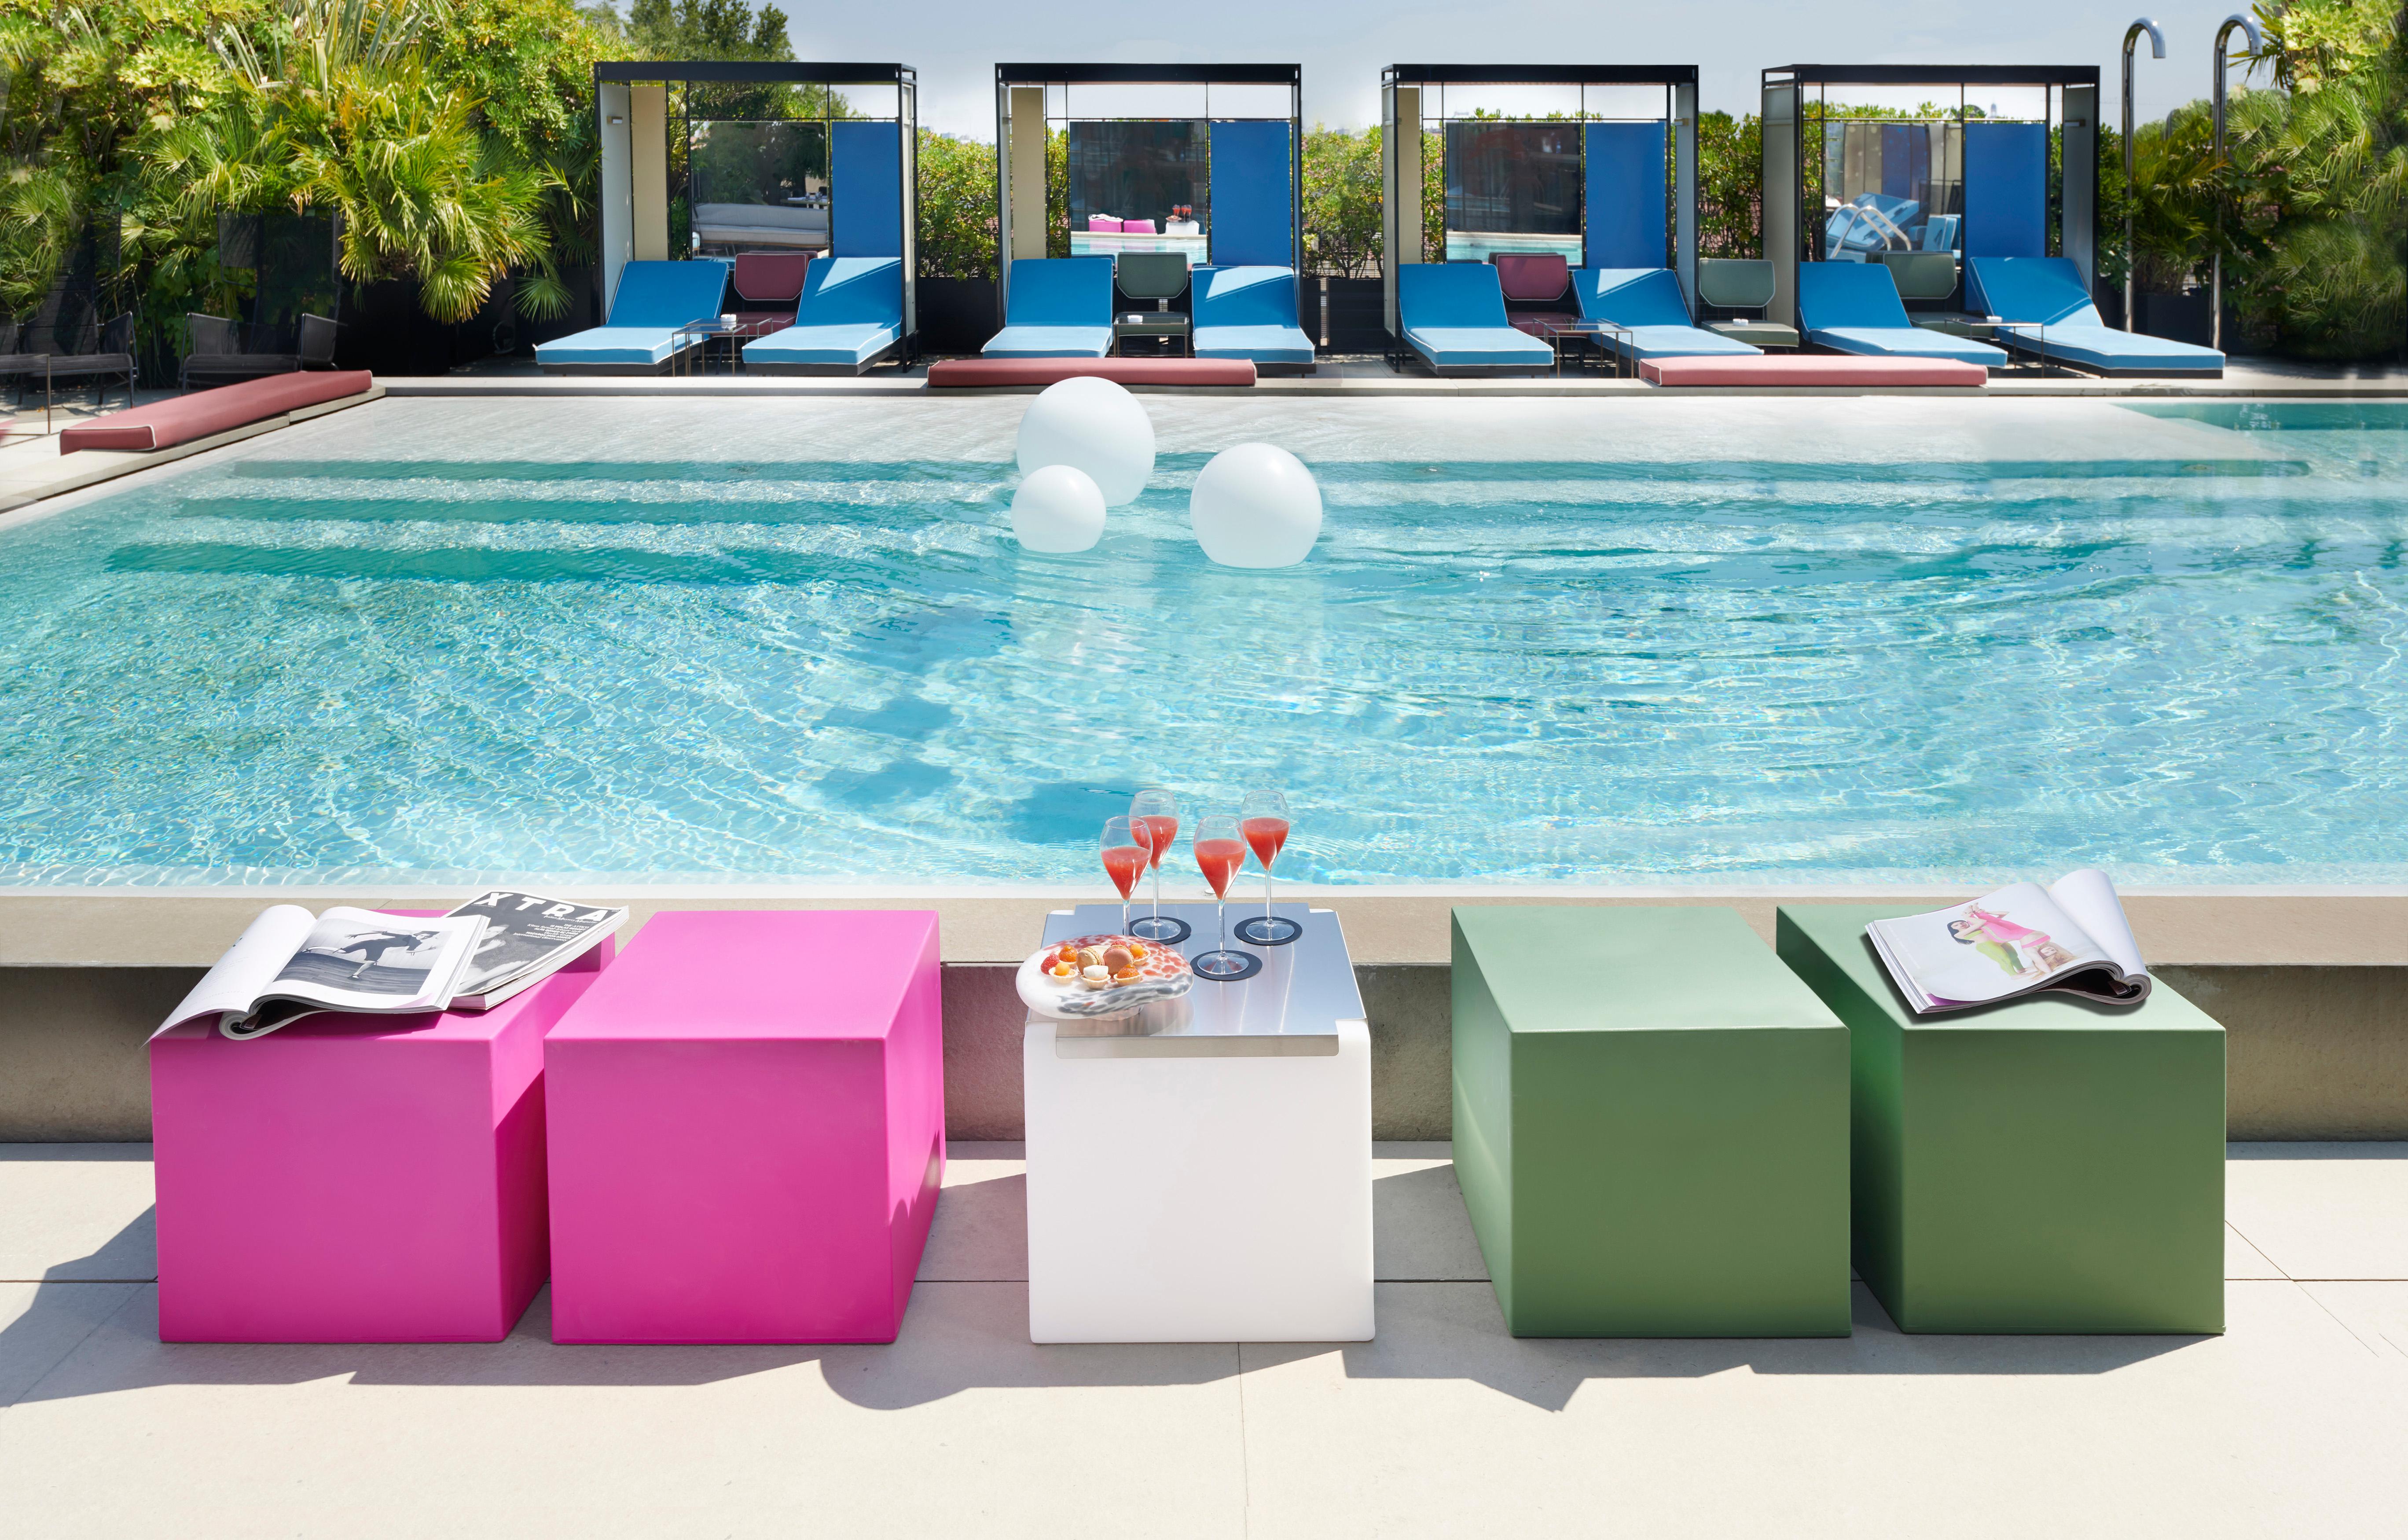 Argil Grey Cubo Pouf Stool by SLIDE Studio
Dimensions: D 43 x W 43 x H 43 cm. 
Materials: Polyethylene.
Weight: 4 kg.

Available in different color options. This product is suitable for indoor and outdoor use. Available in different versions: